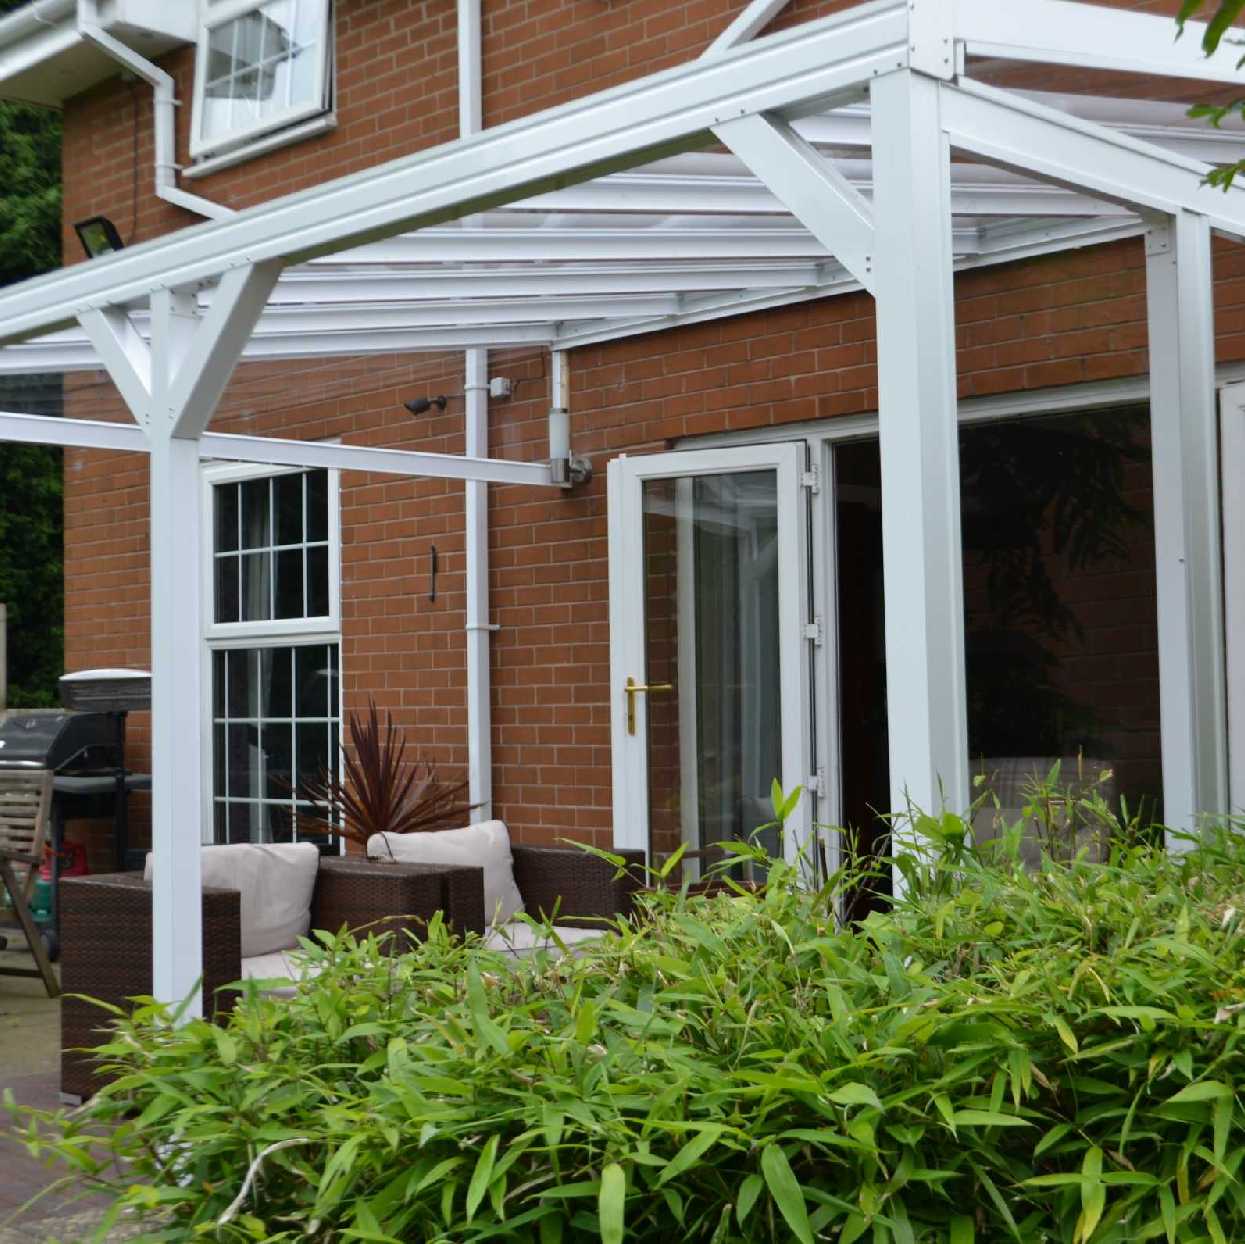 Omega Smart Lean-To Canopy, White with 6mm Glass Clear Plate Polycarbonate Glazing - 9.8m (W) x 1.5m (P), (5) Supporting Posts from Omega Build